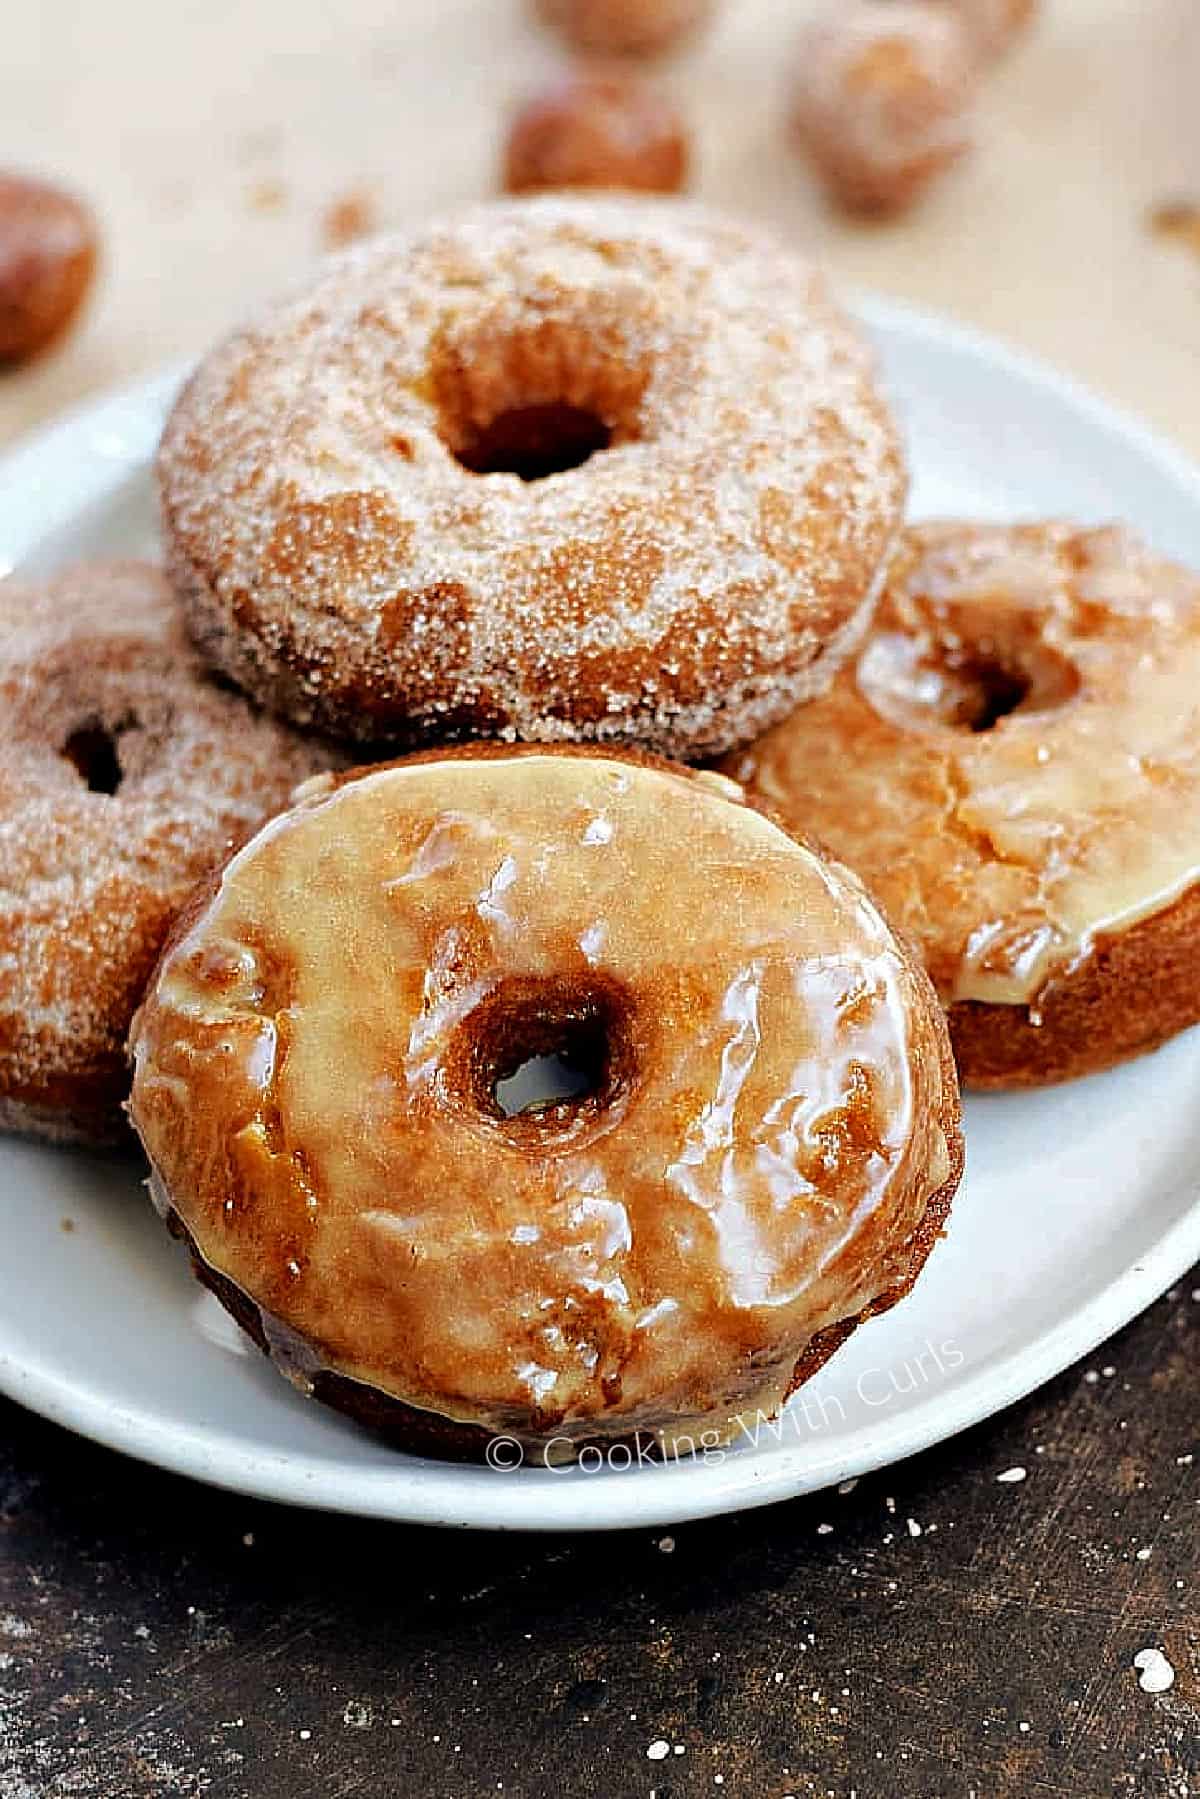 Glazed and sugar coated apple cider doughnuts on a plate. 